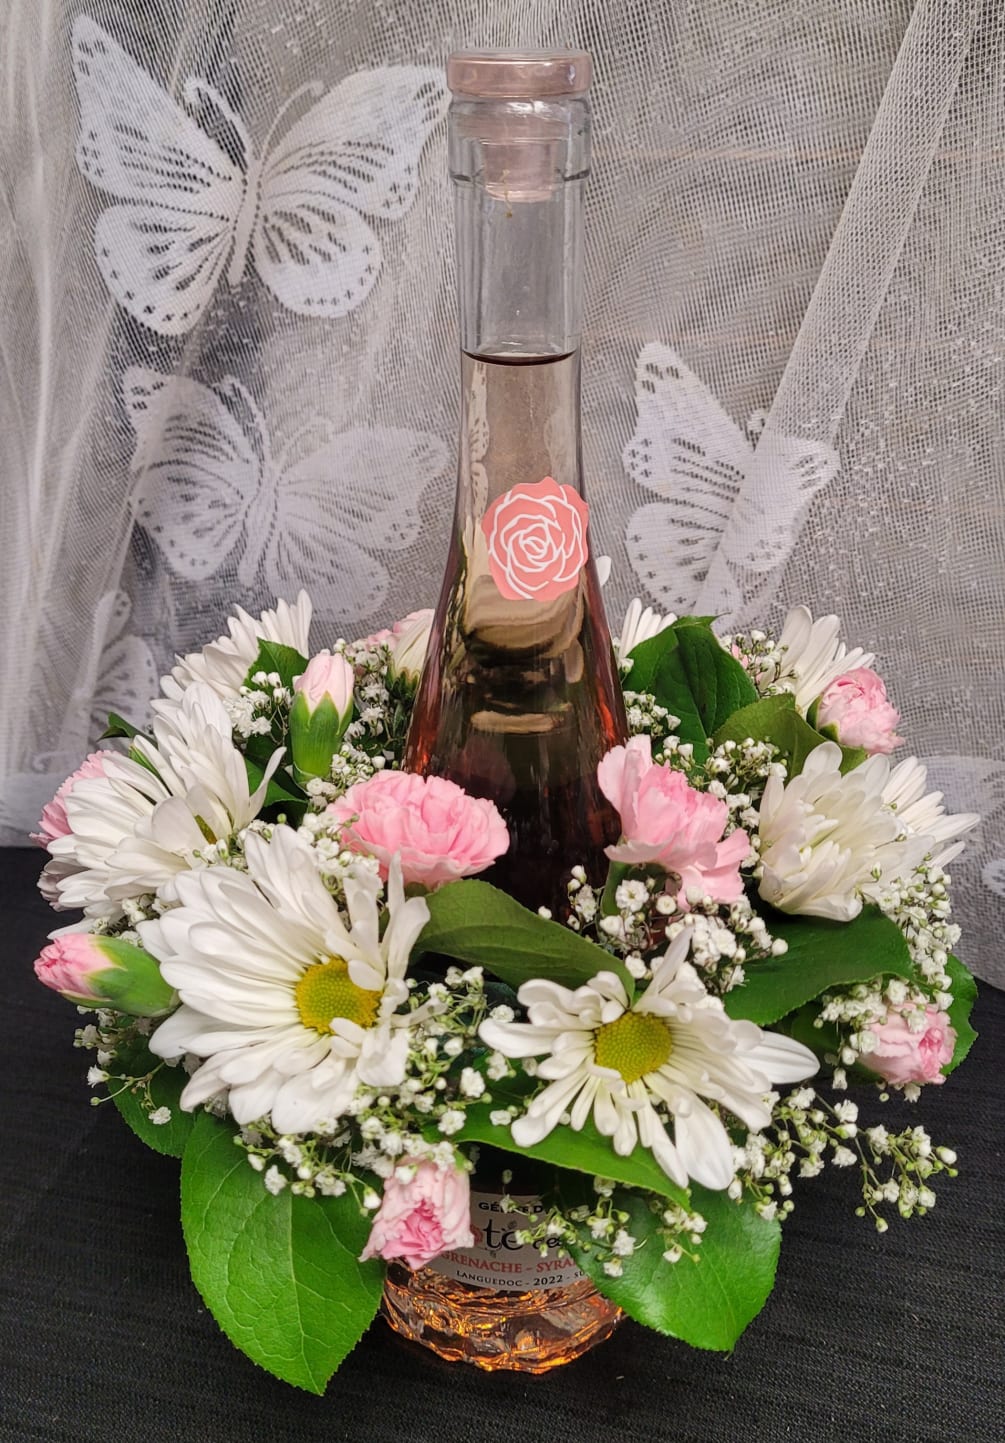 Flowers and wine are always a great combo. We have paired these